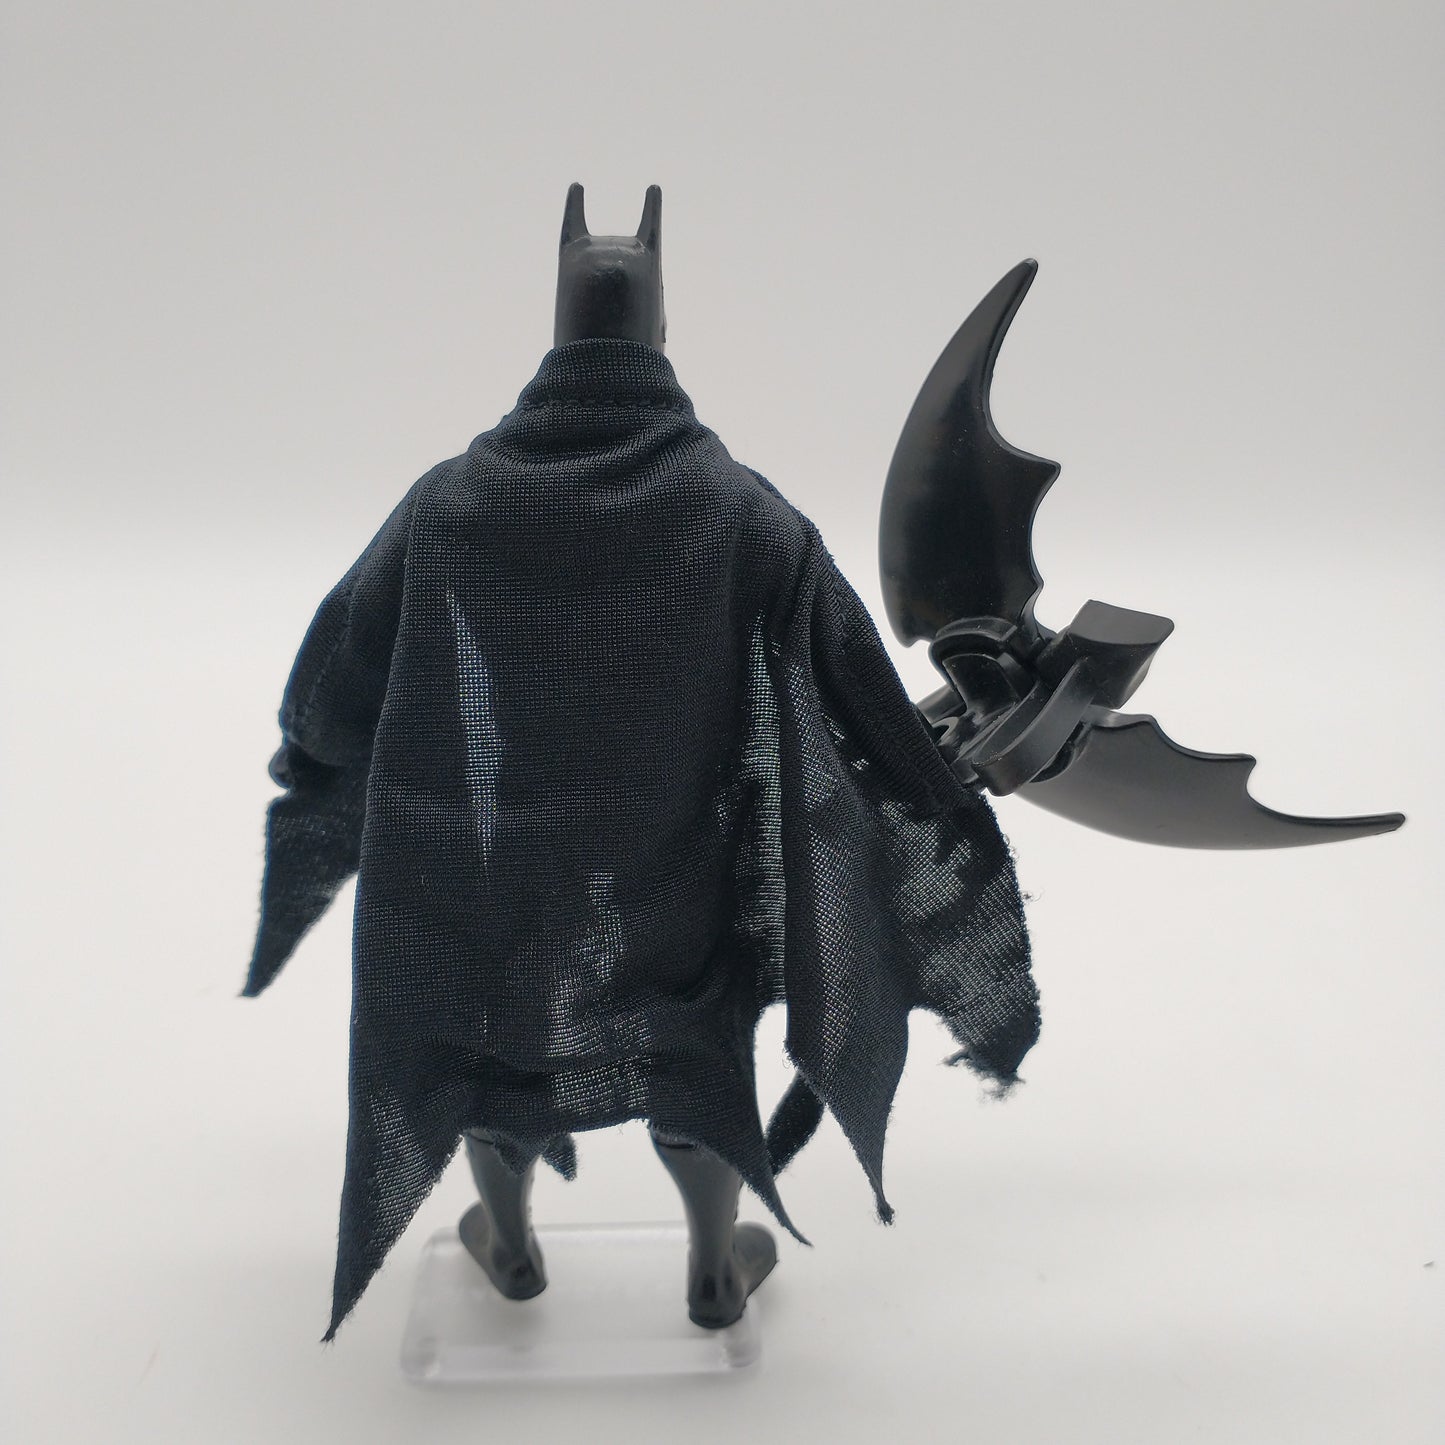 The back of the figure